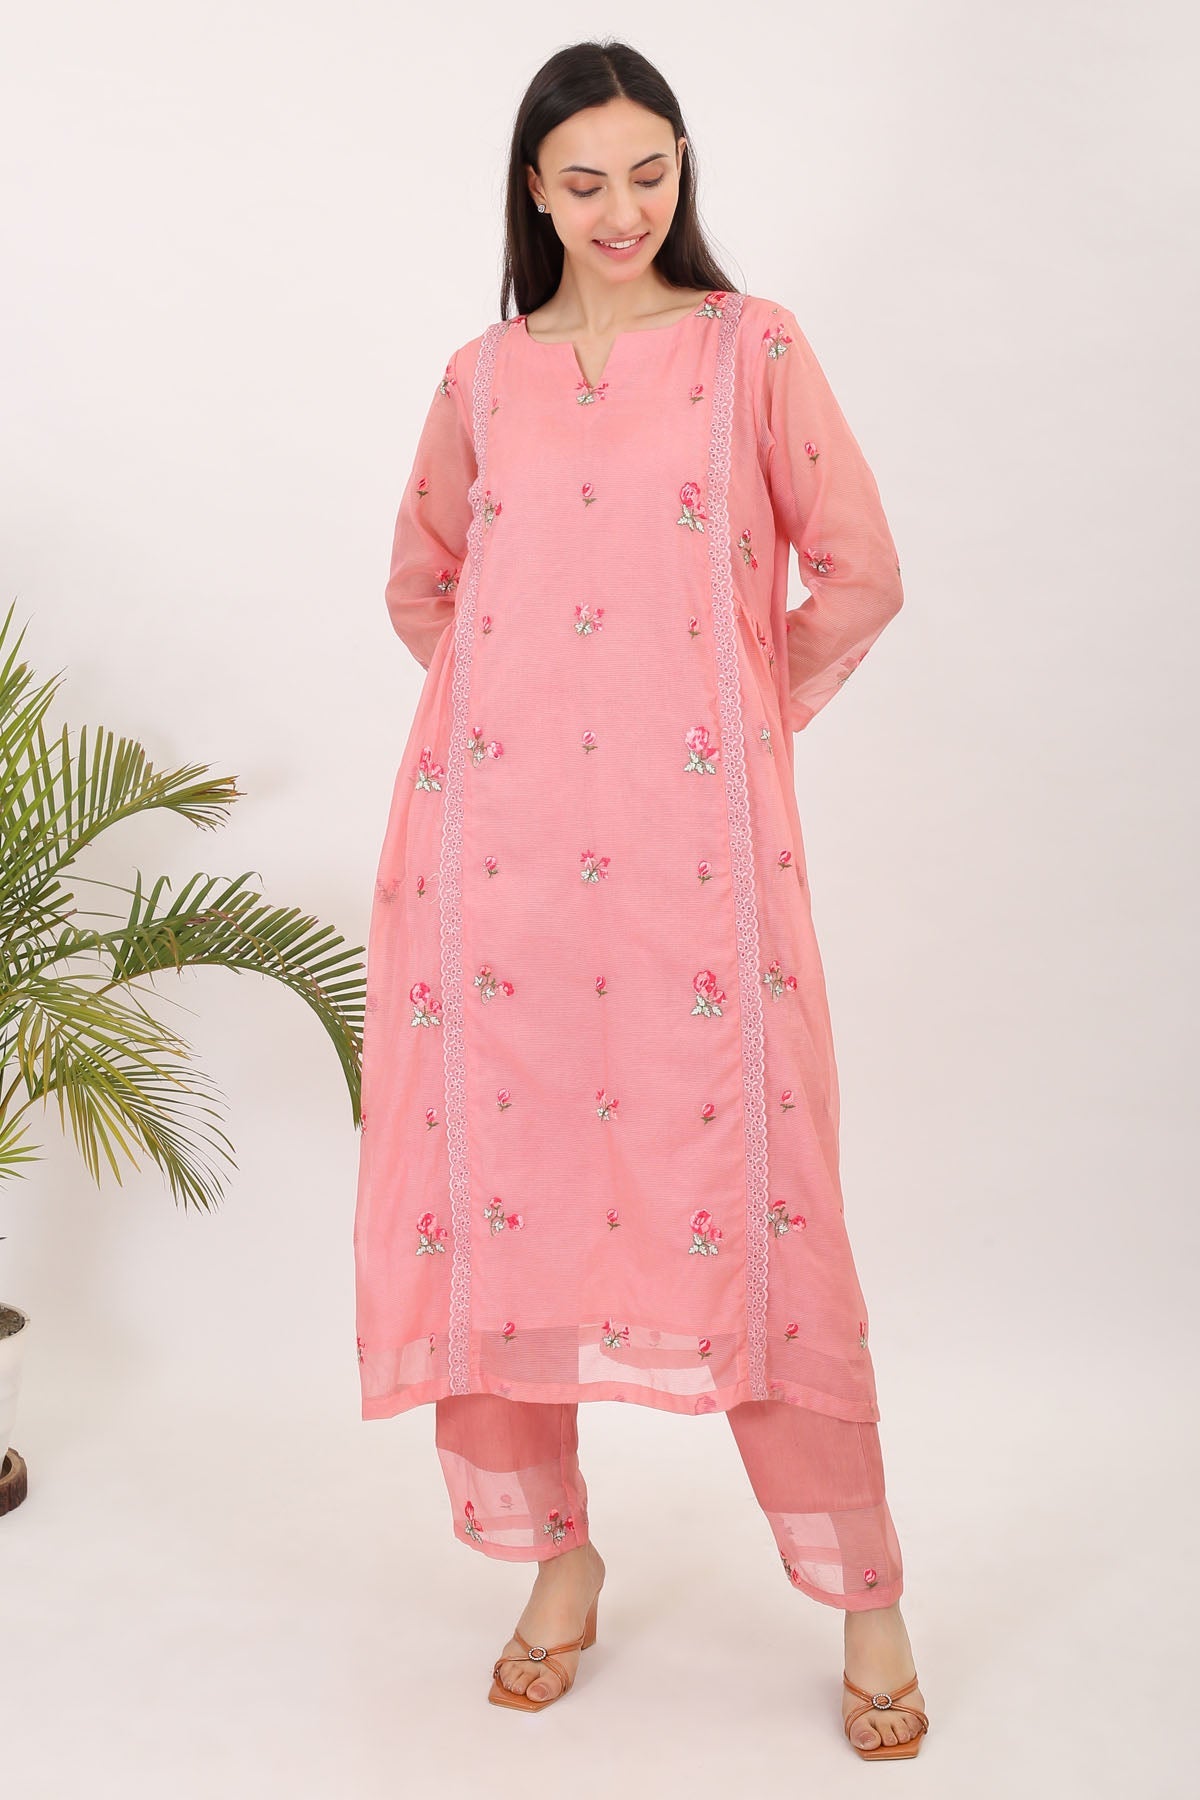 Simply Kitsch Pink Embroidered Kurta & Pants For Women Online At ScrollnShops